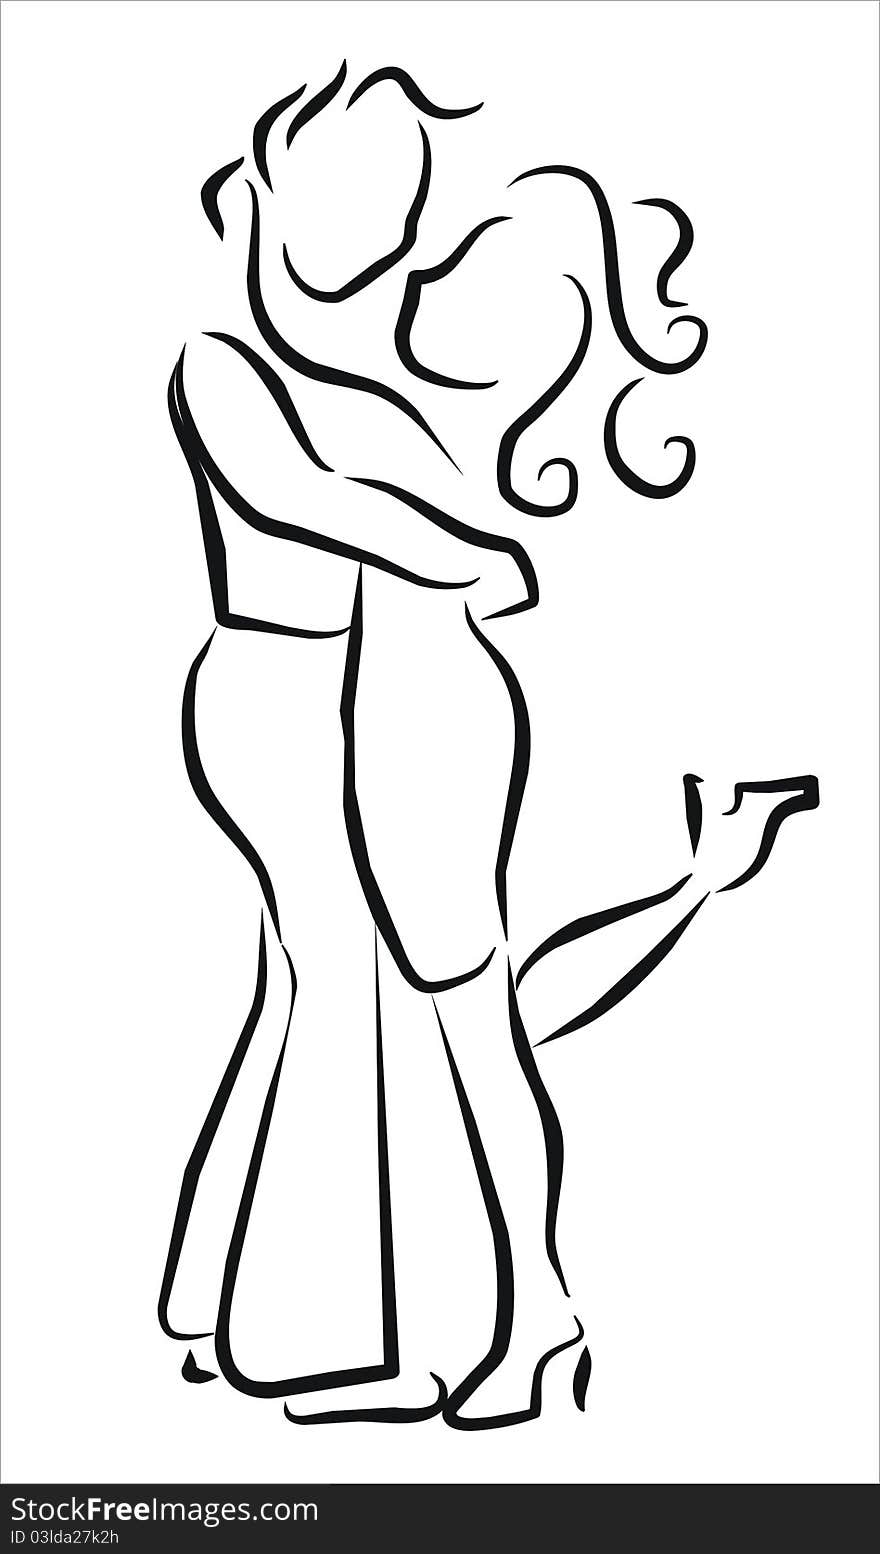 Pair of lovers embracing and kissing